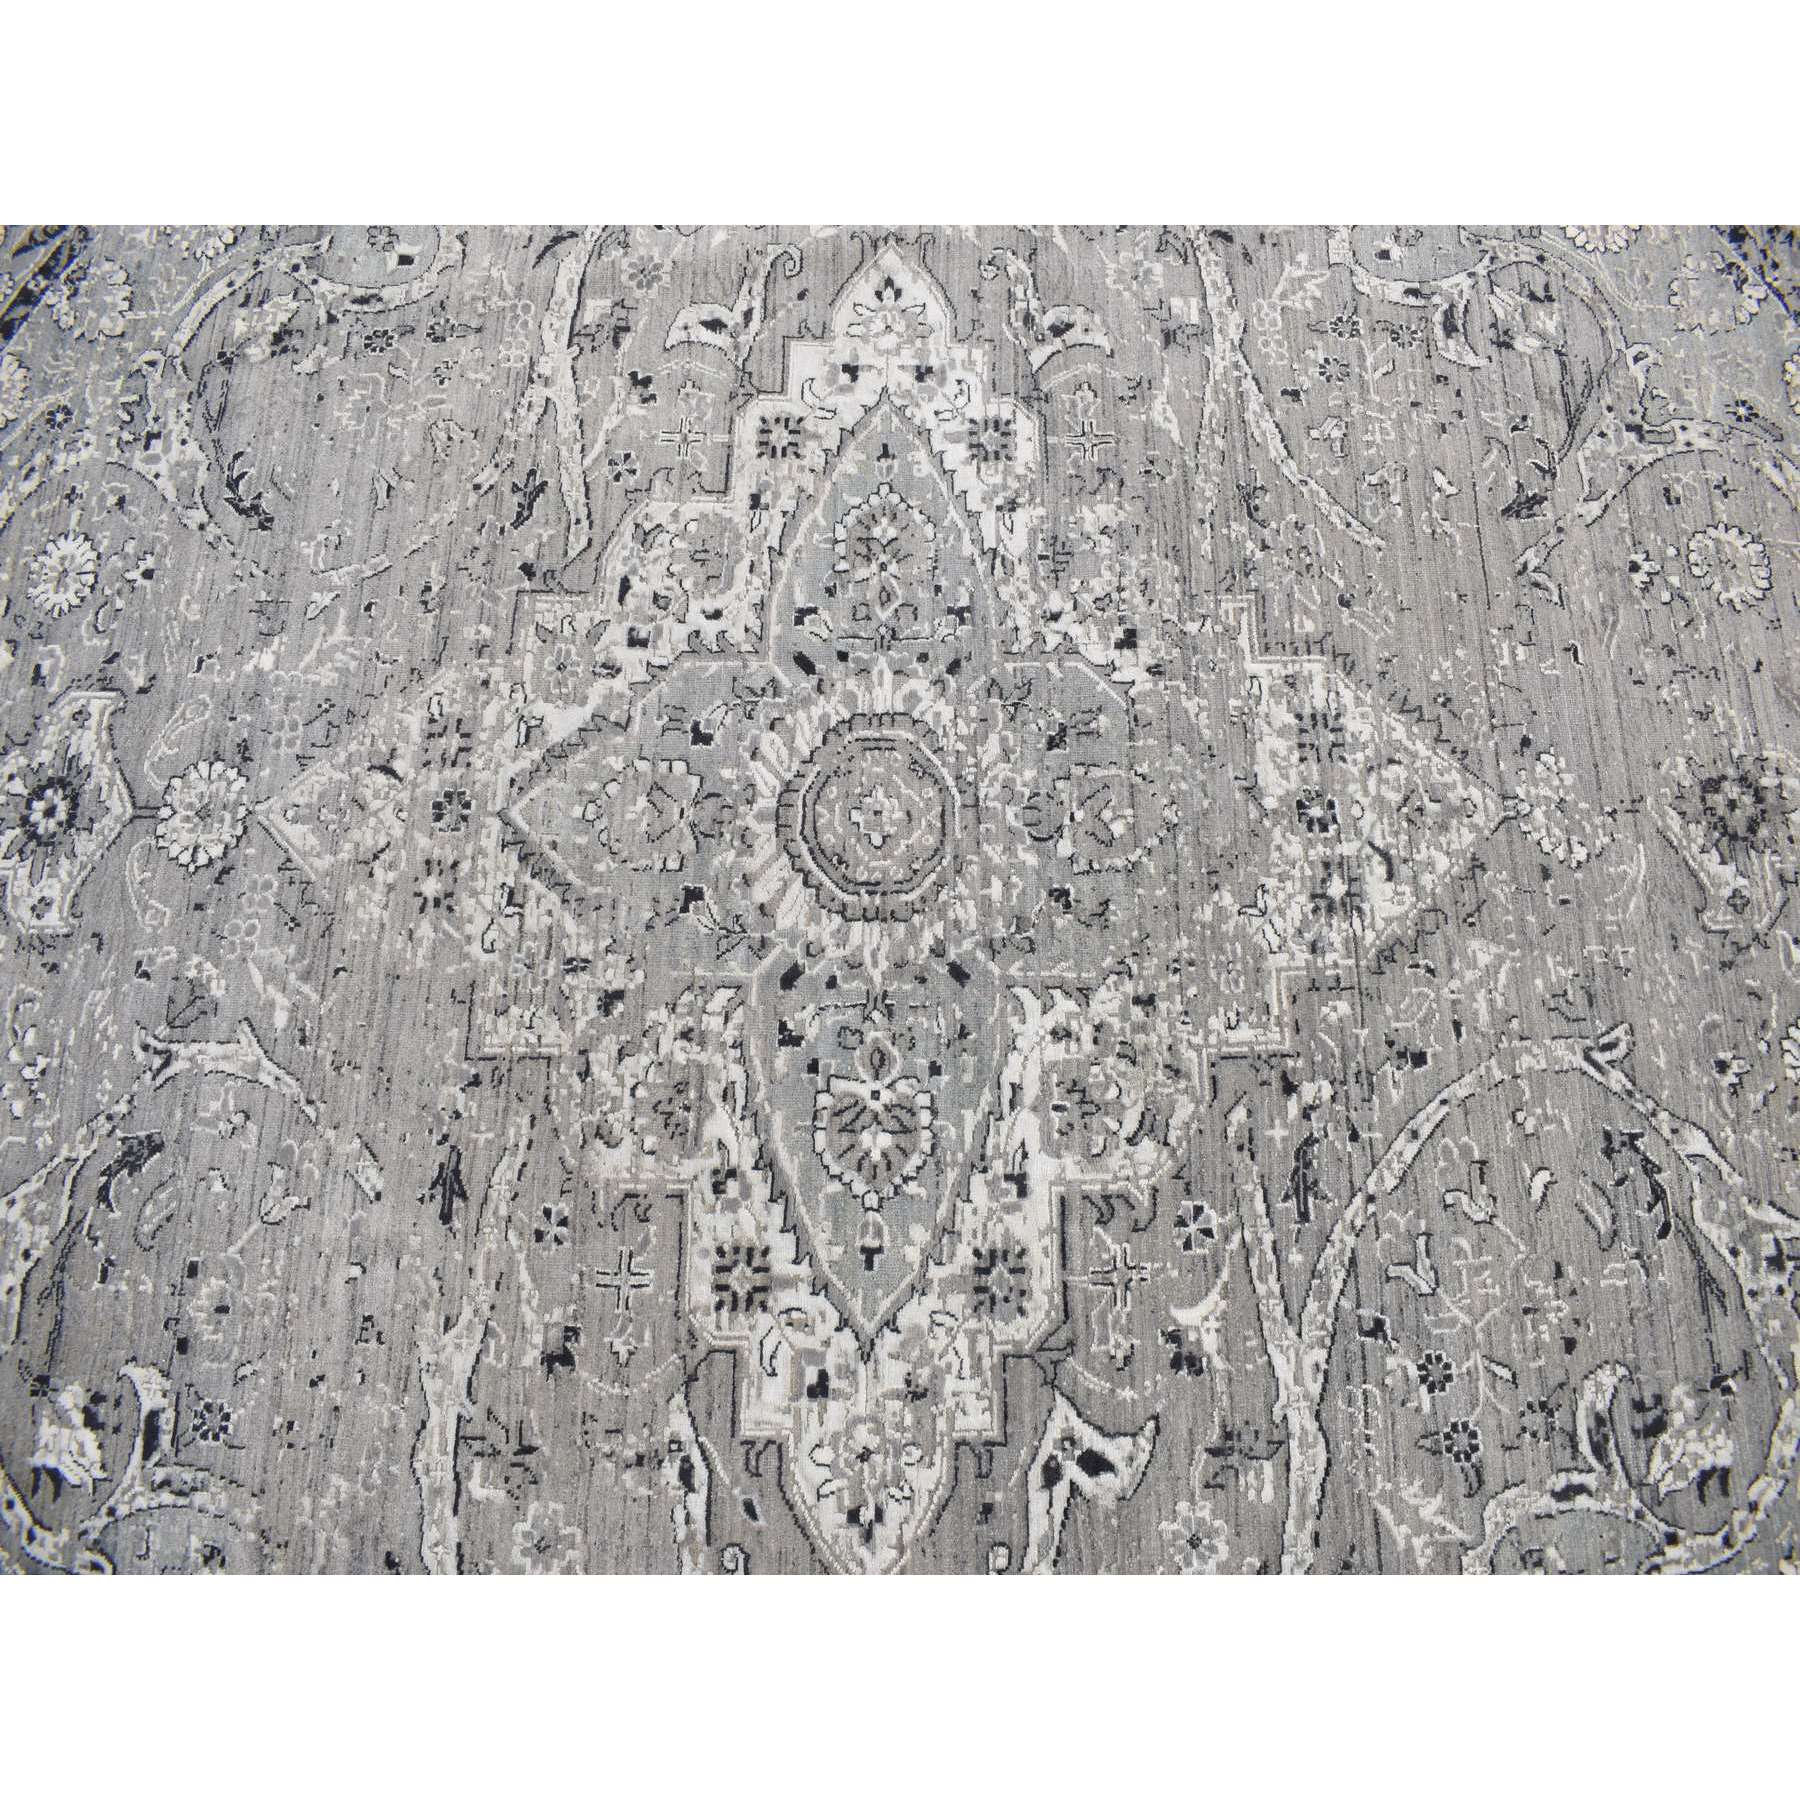  Wool Hand-Knotted Area Rug 12'0